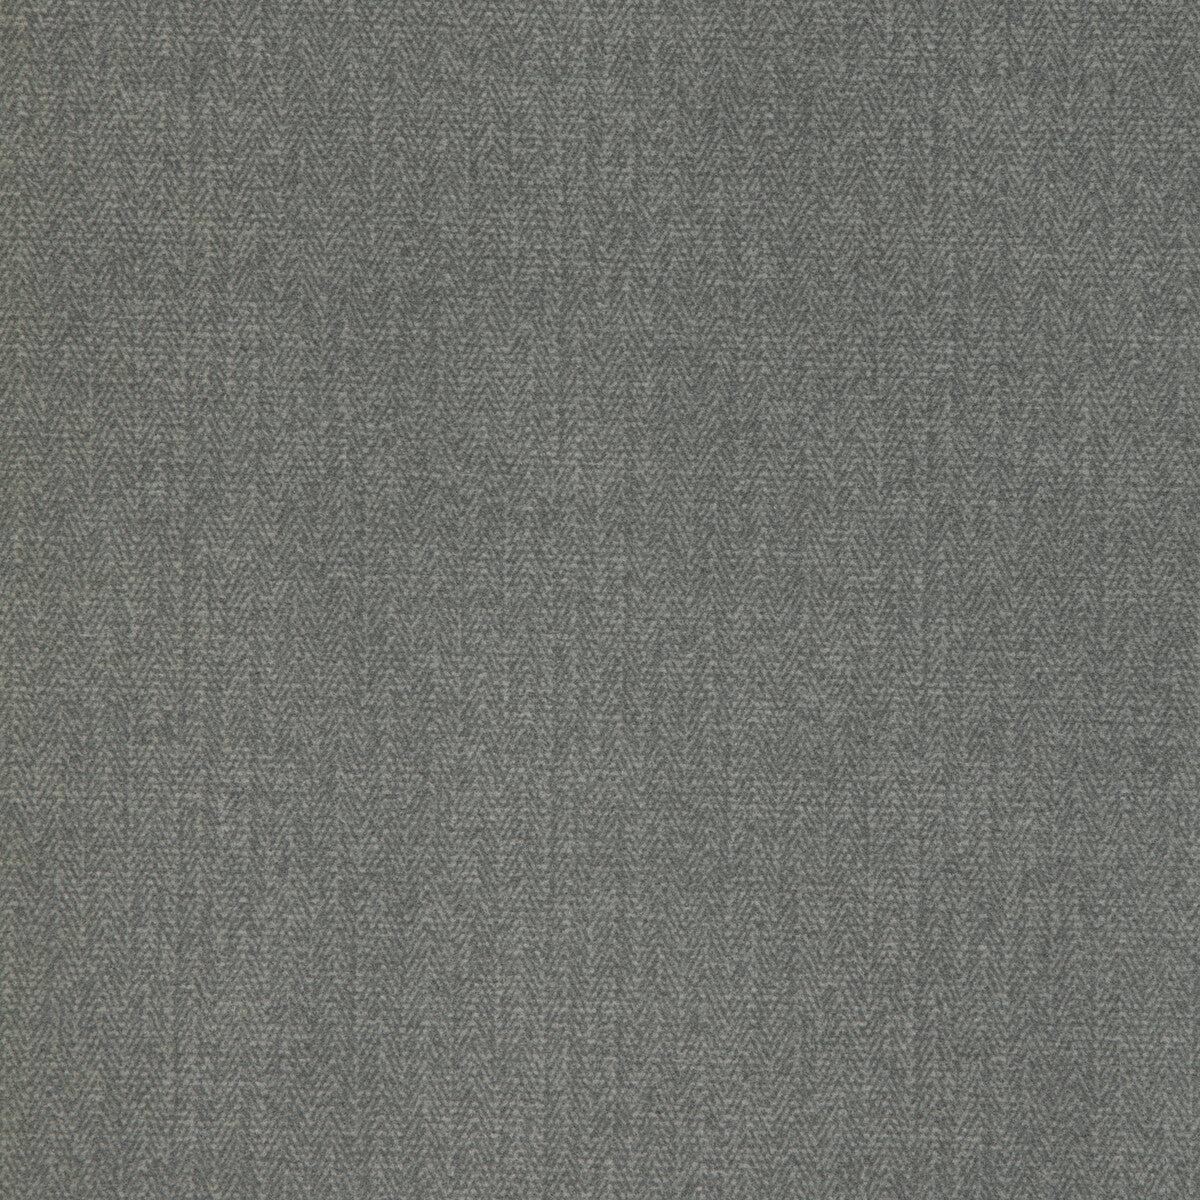 Kravet Design fabric in twill-581072 color - pattern TWILL.5810-72.0 - by Kravet Design in the Performance collection